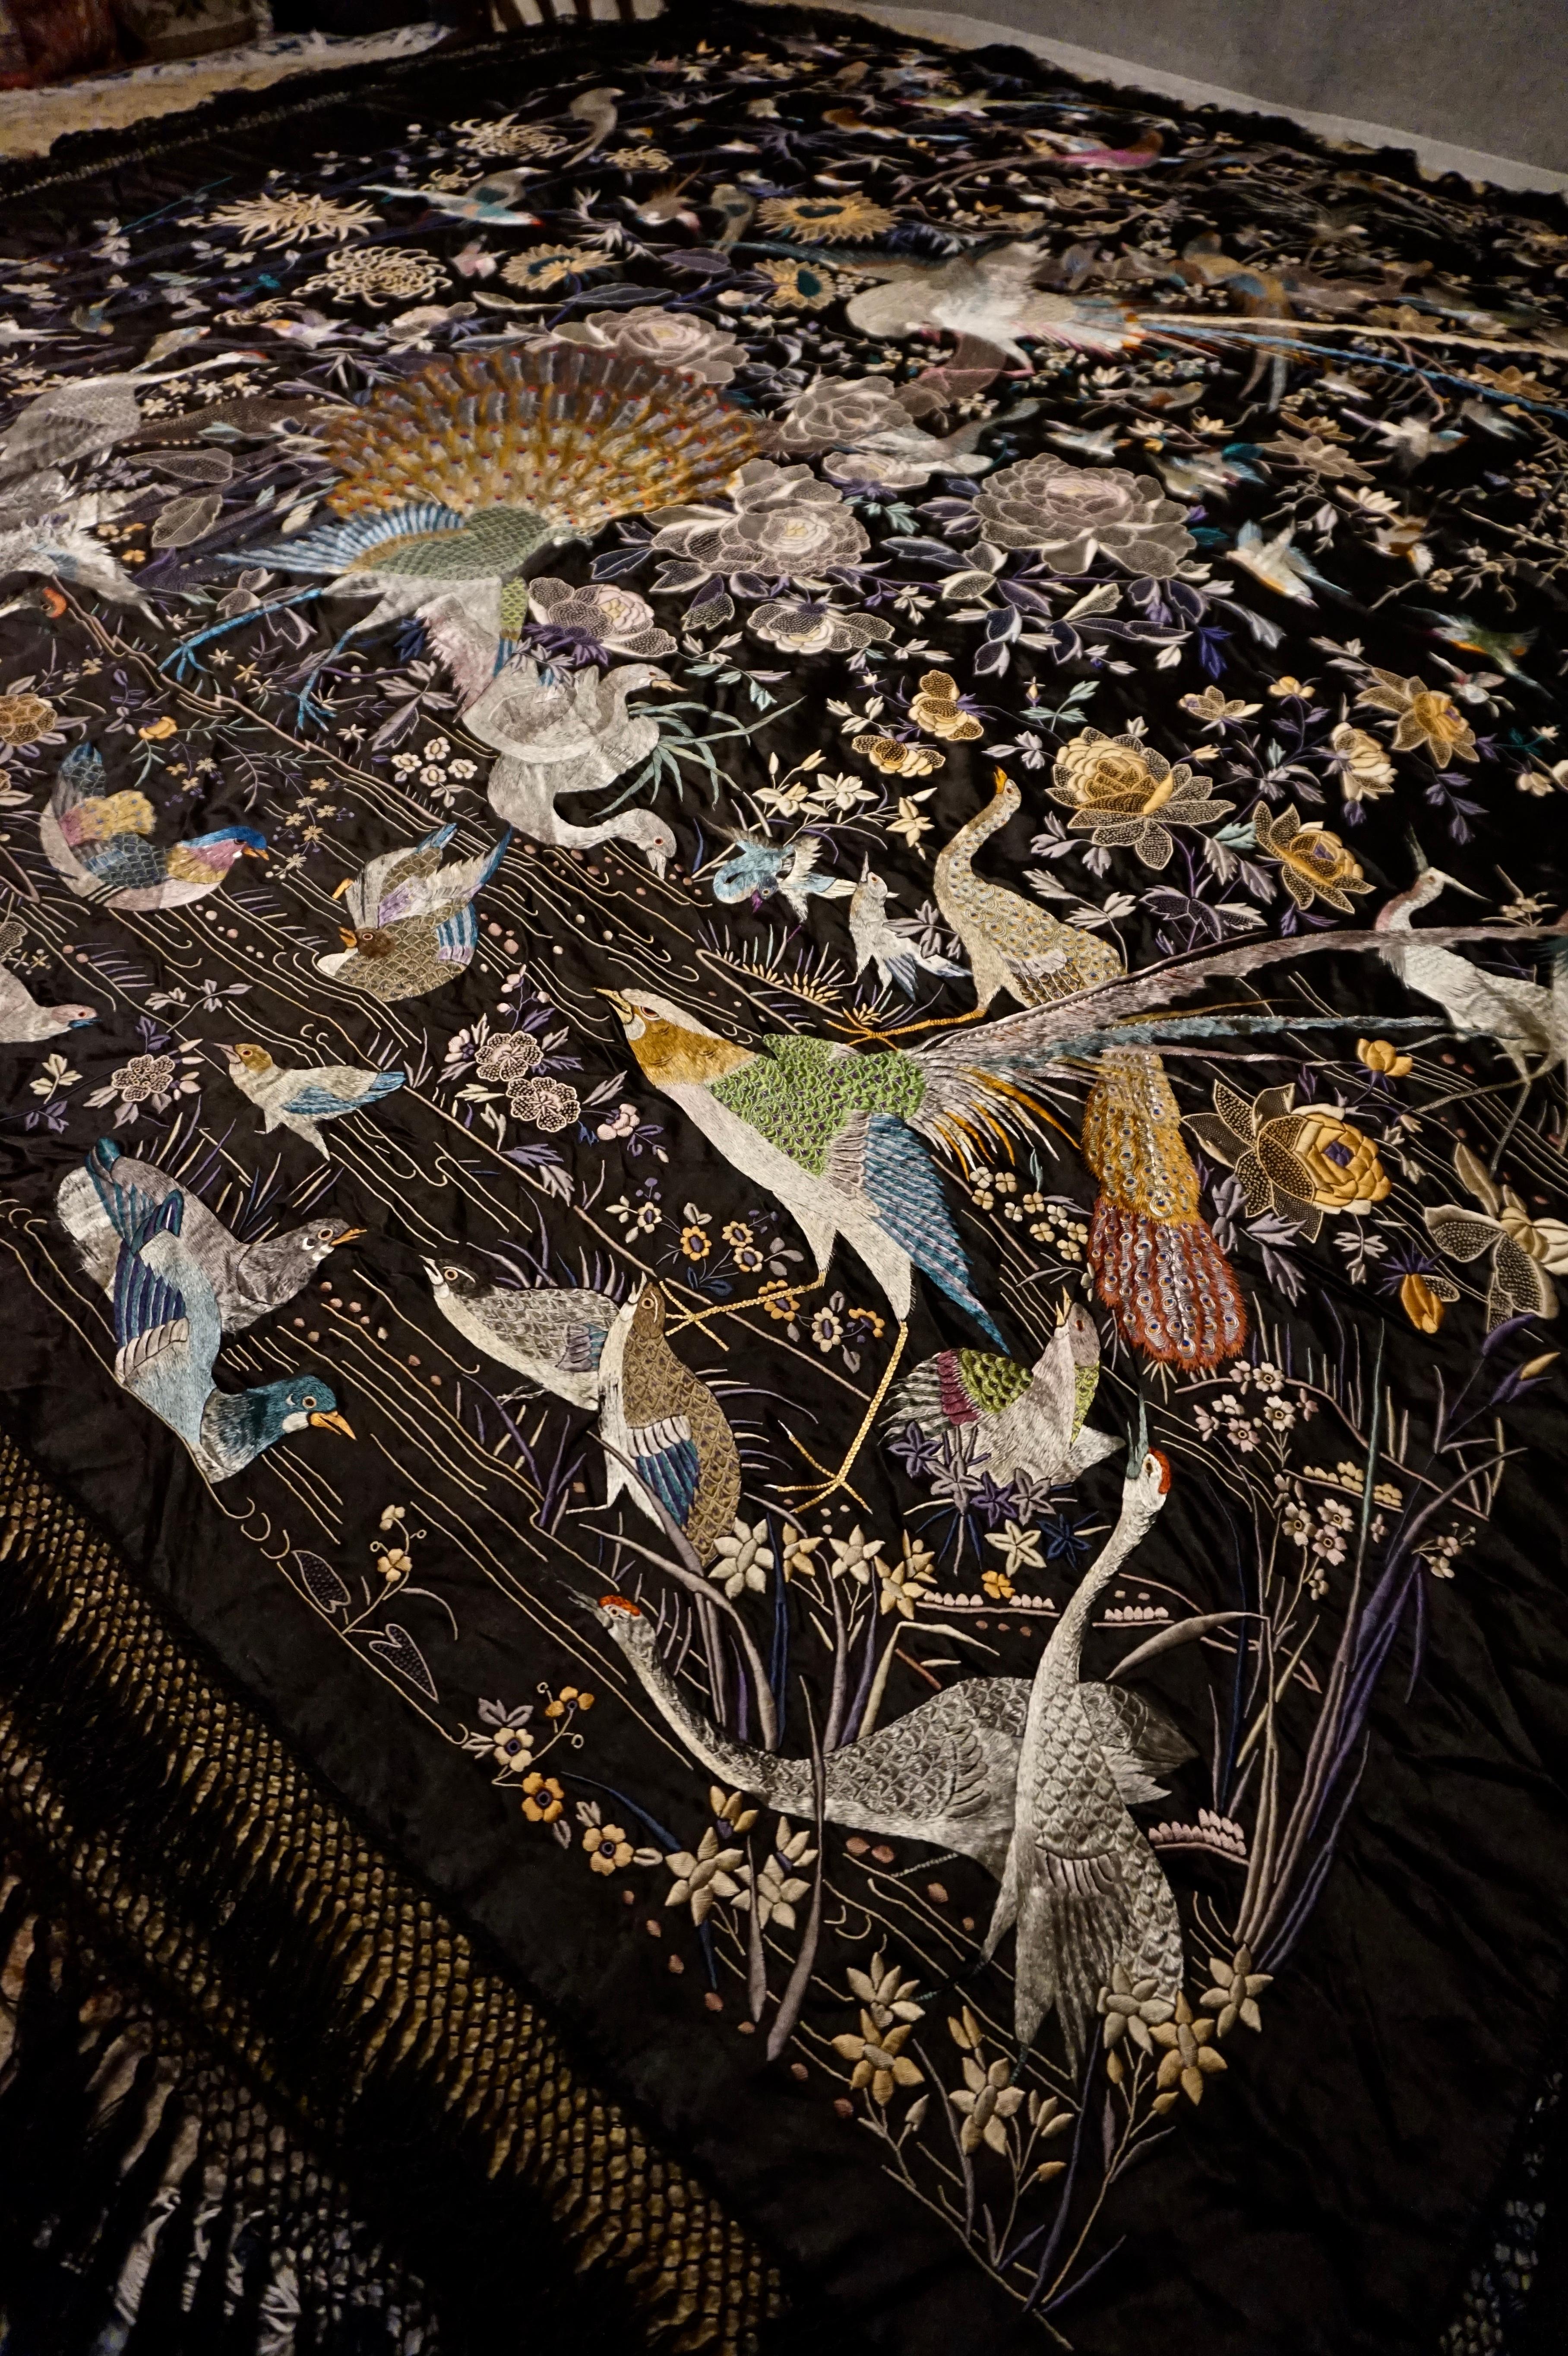 Rare superfine antique silk Chinese embroidery in a large size depicting multiple birds against a contrasting night sky. Exquisite rendition in a myriad vivid hues not to be seen again. Excellent condition,

circa 1890s.